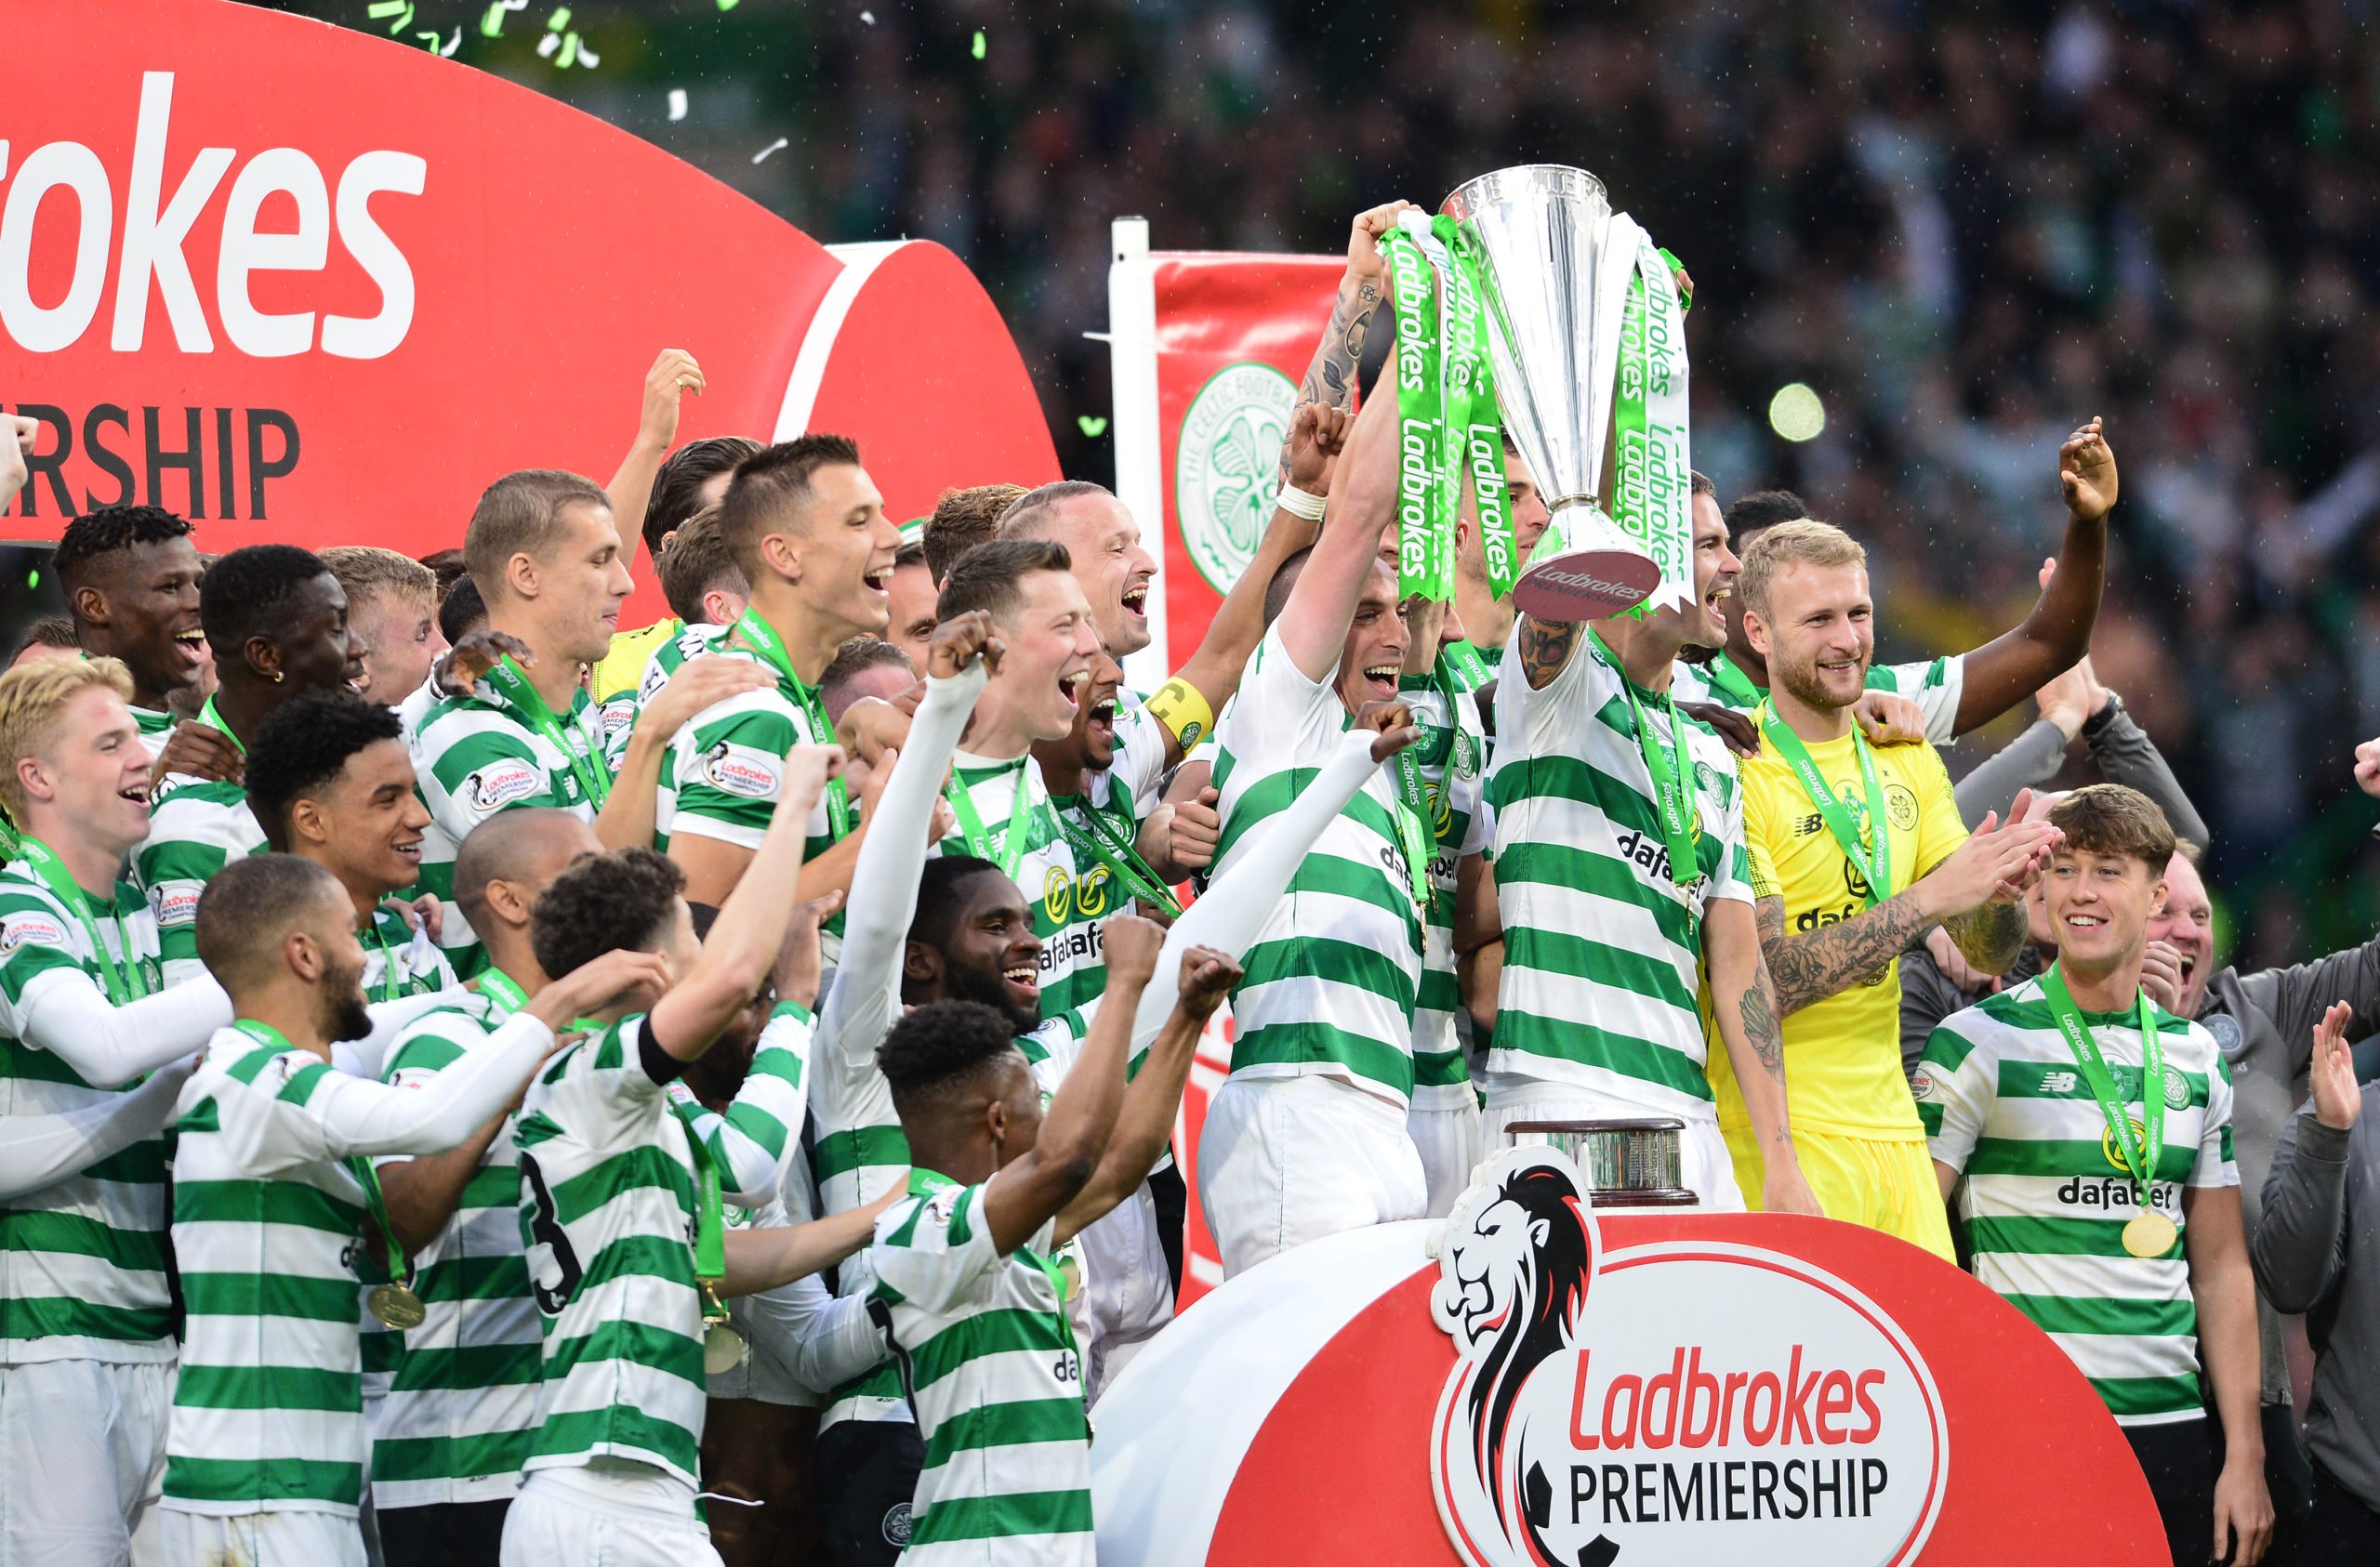 Neil McCann predicts Celtic will lose title to Rangers on BBC Sportsound; Michael Stewart counters